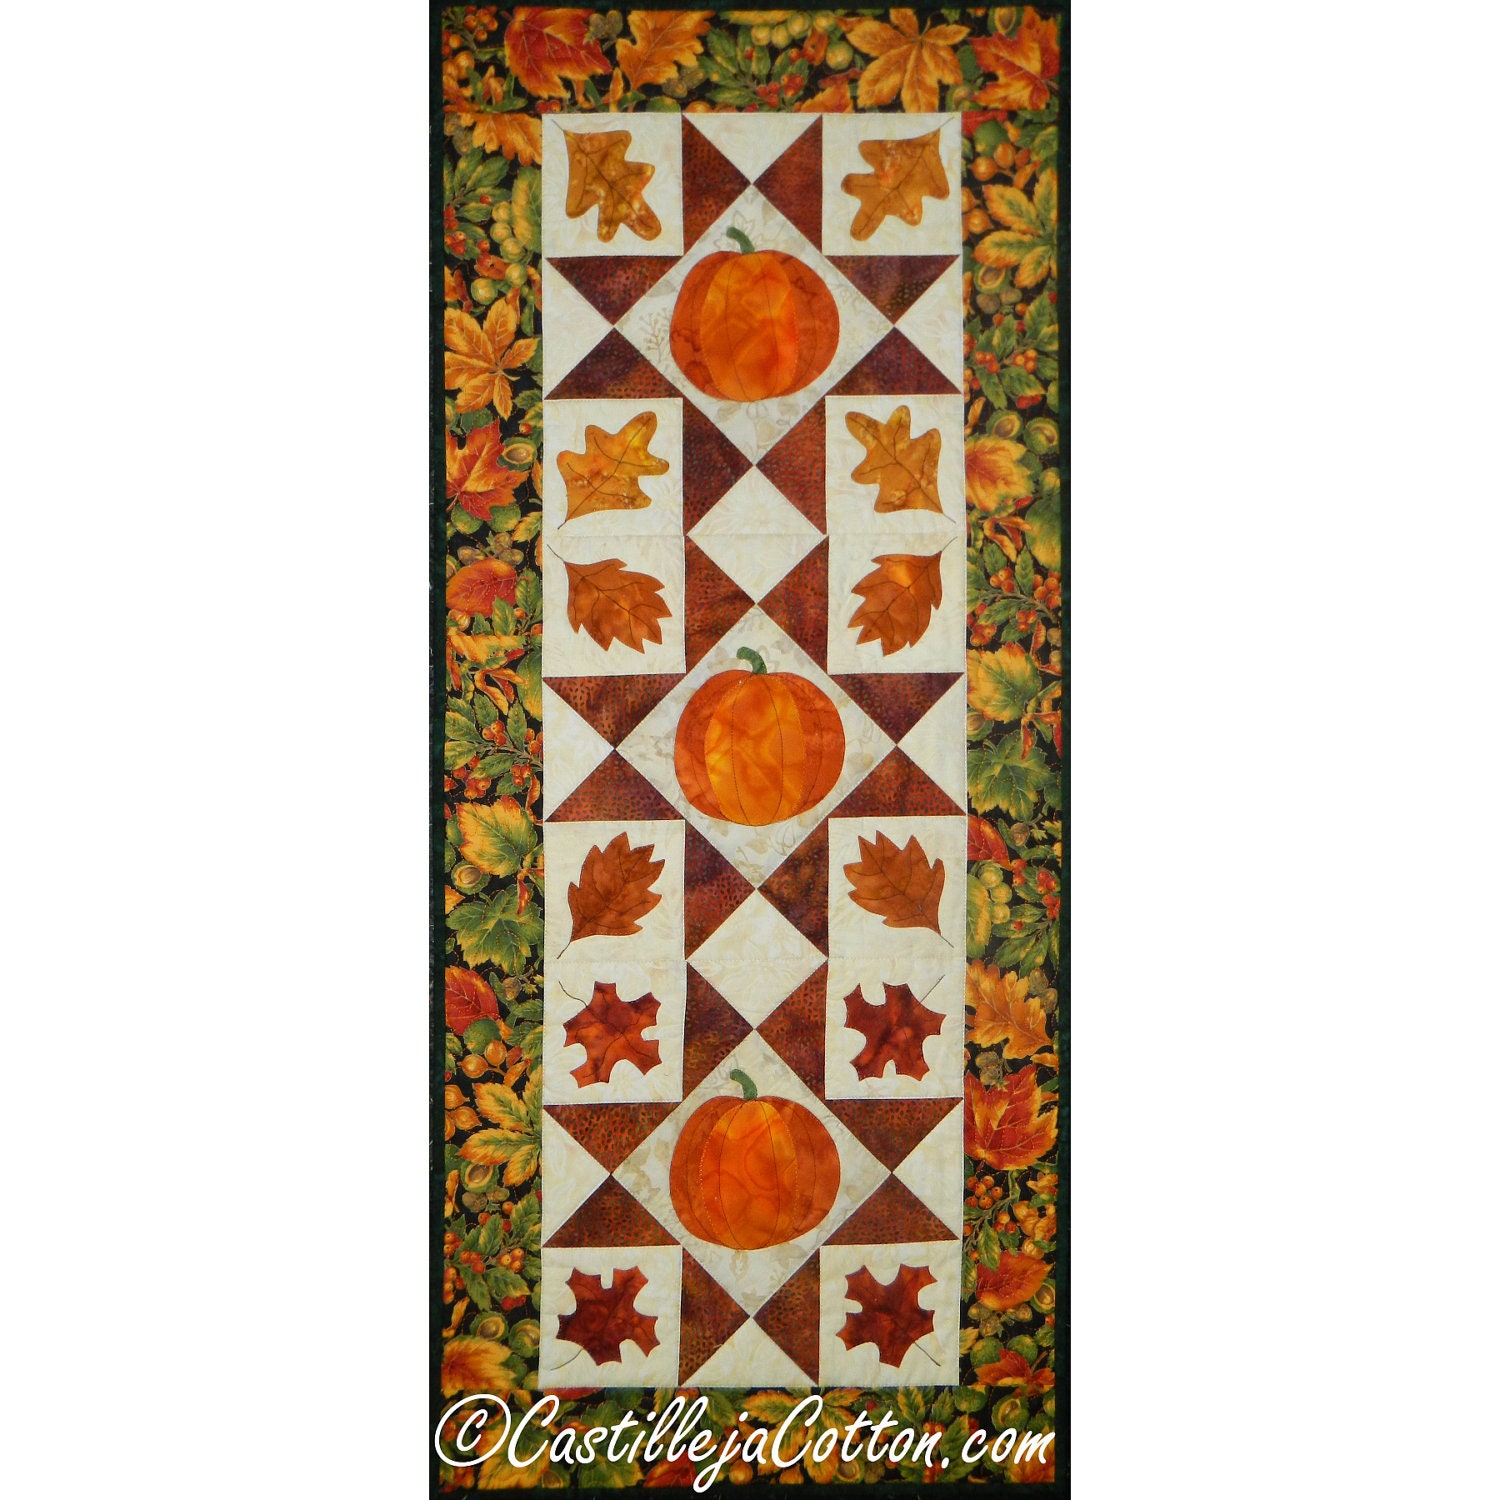 On Sale Starry Autumn Table Runner or Wall Hanging - castillejacotton